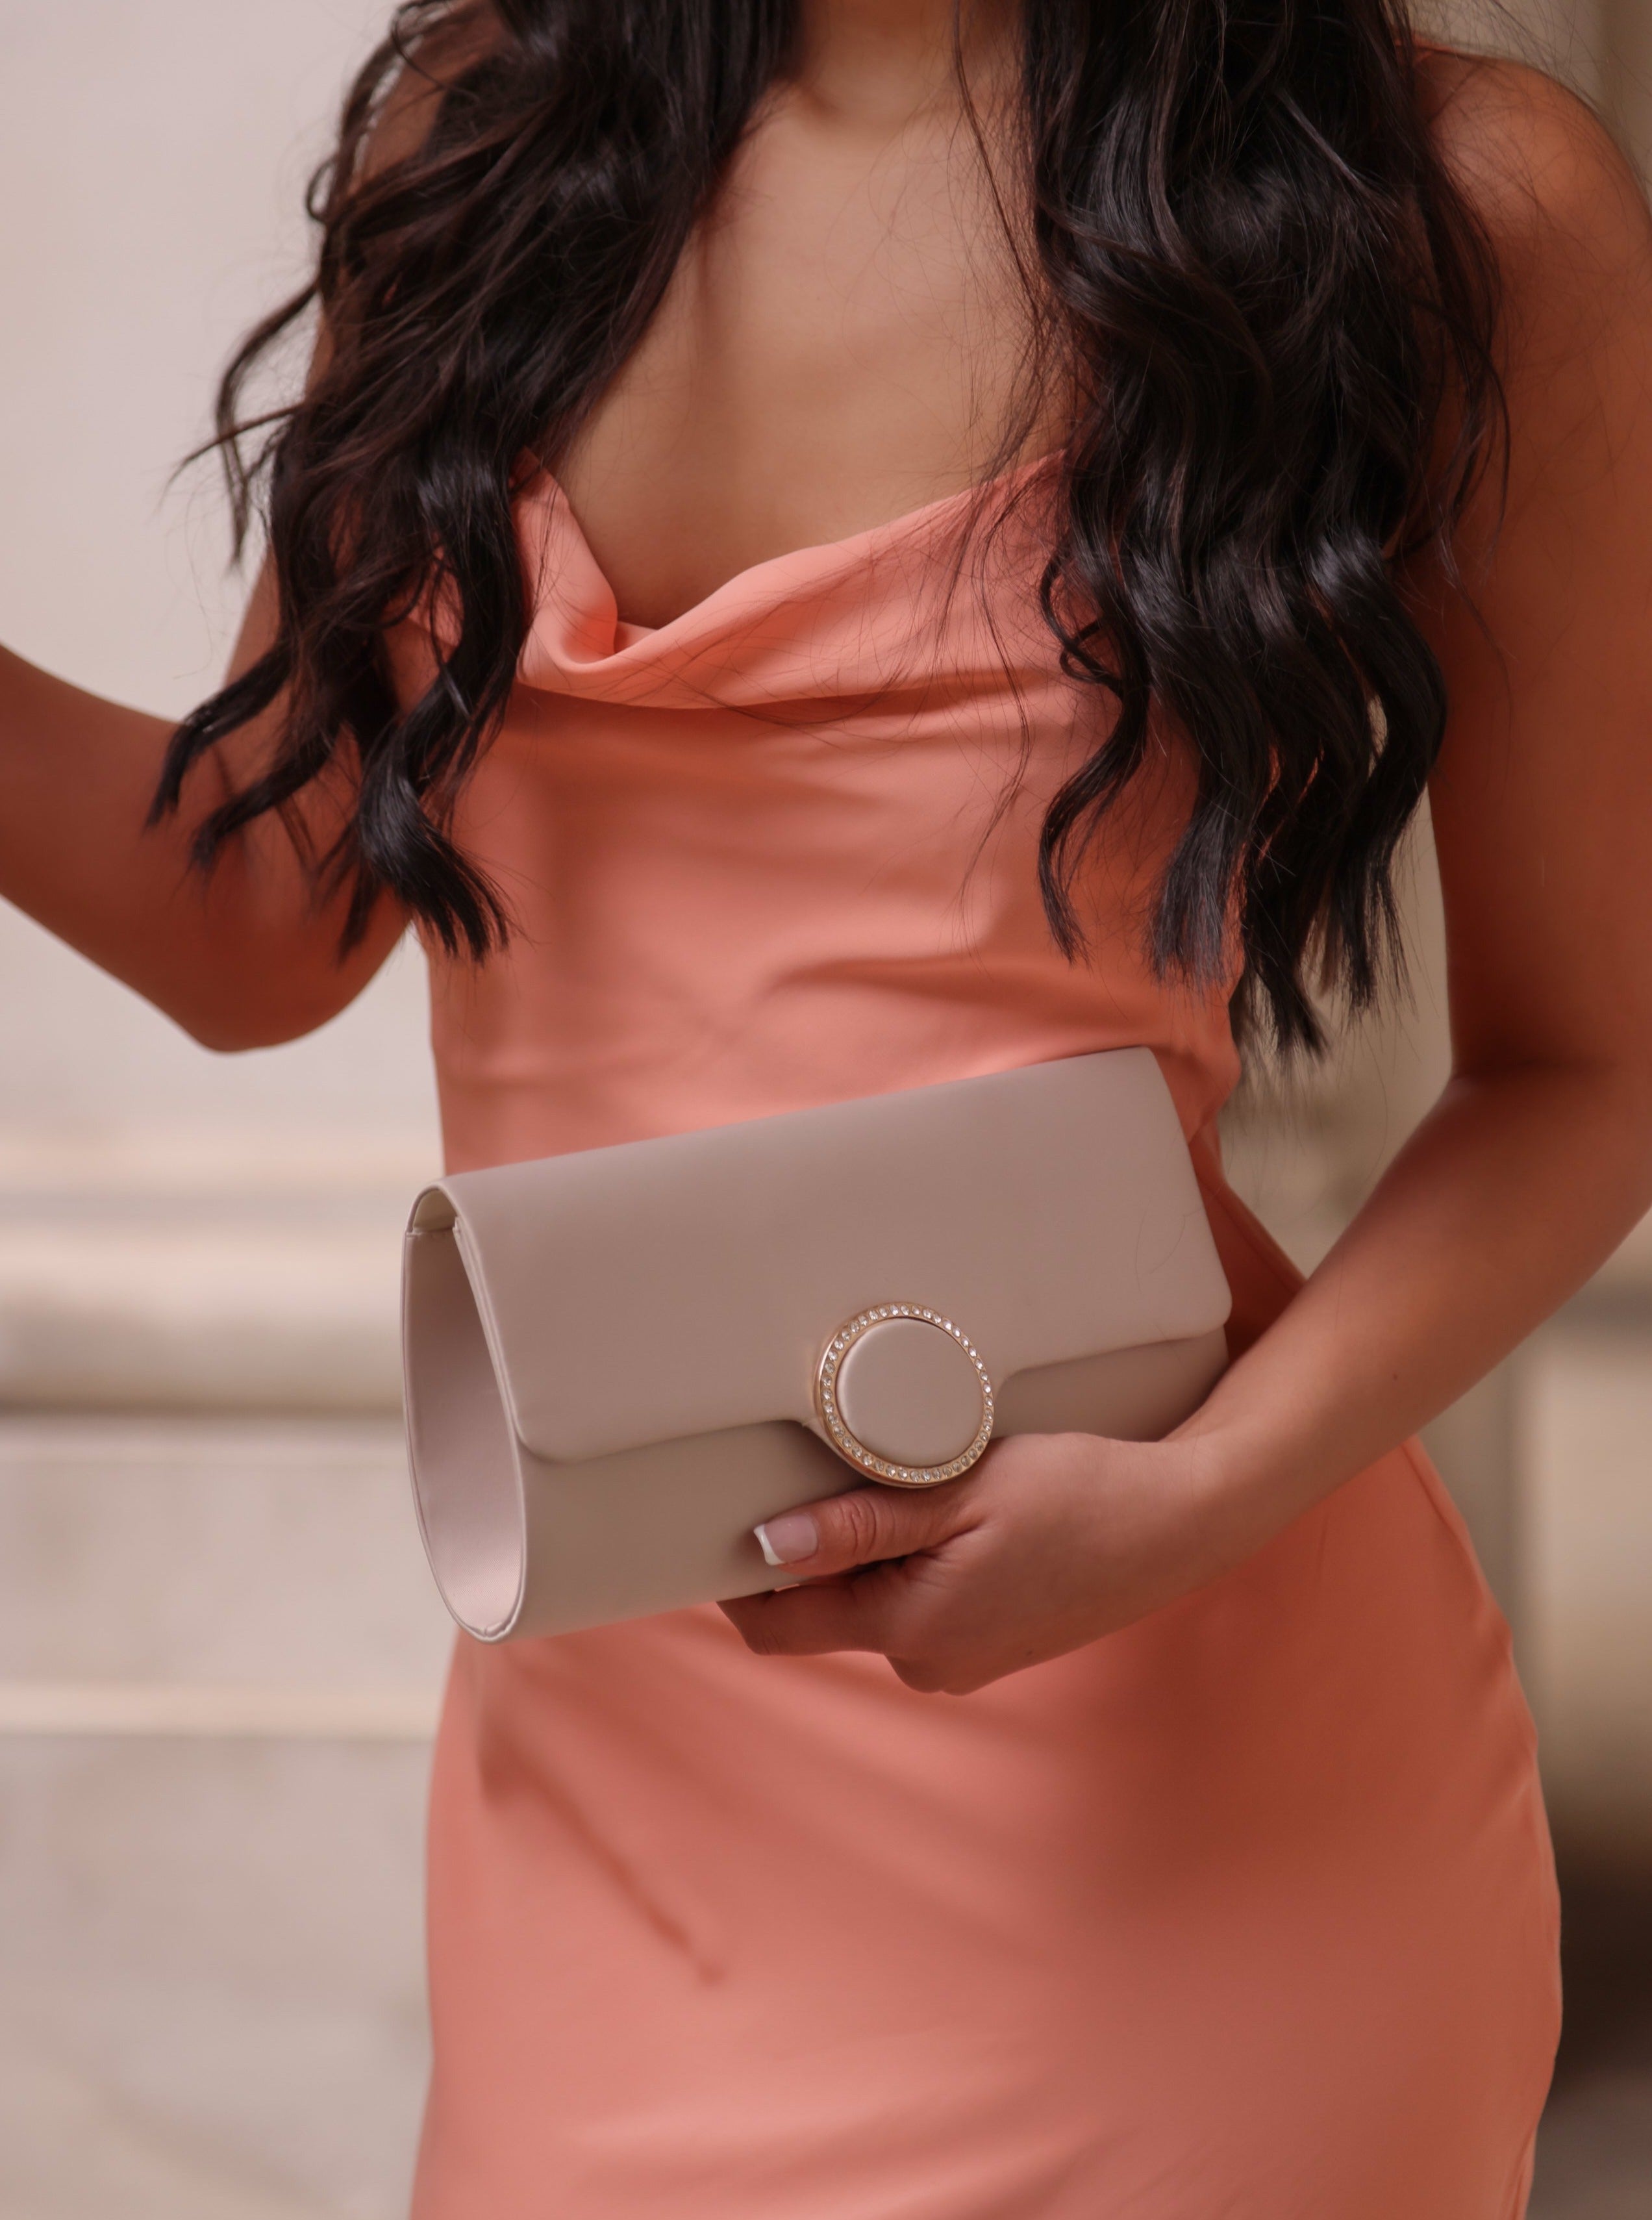 Satin Clutch with Diamante in Champagne | Occasion | Bag | Wedding guest | Wedding | Races | Clutch Bag | Women's Accessories | Women | Date | Races | Old Money | Event | Evening Bag | Evening Accessories 